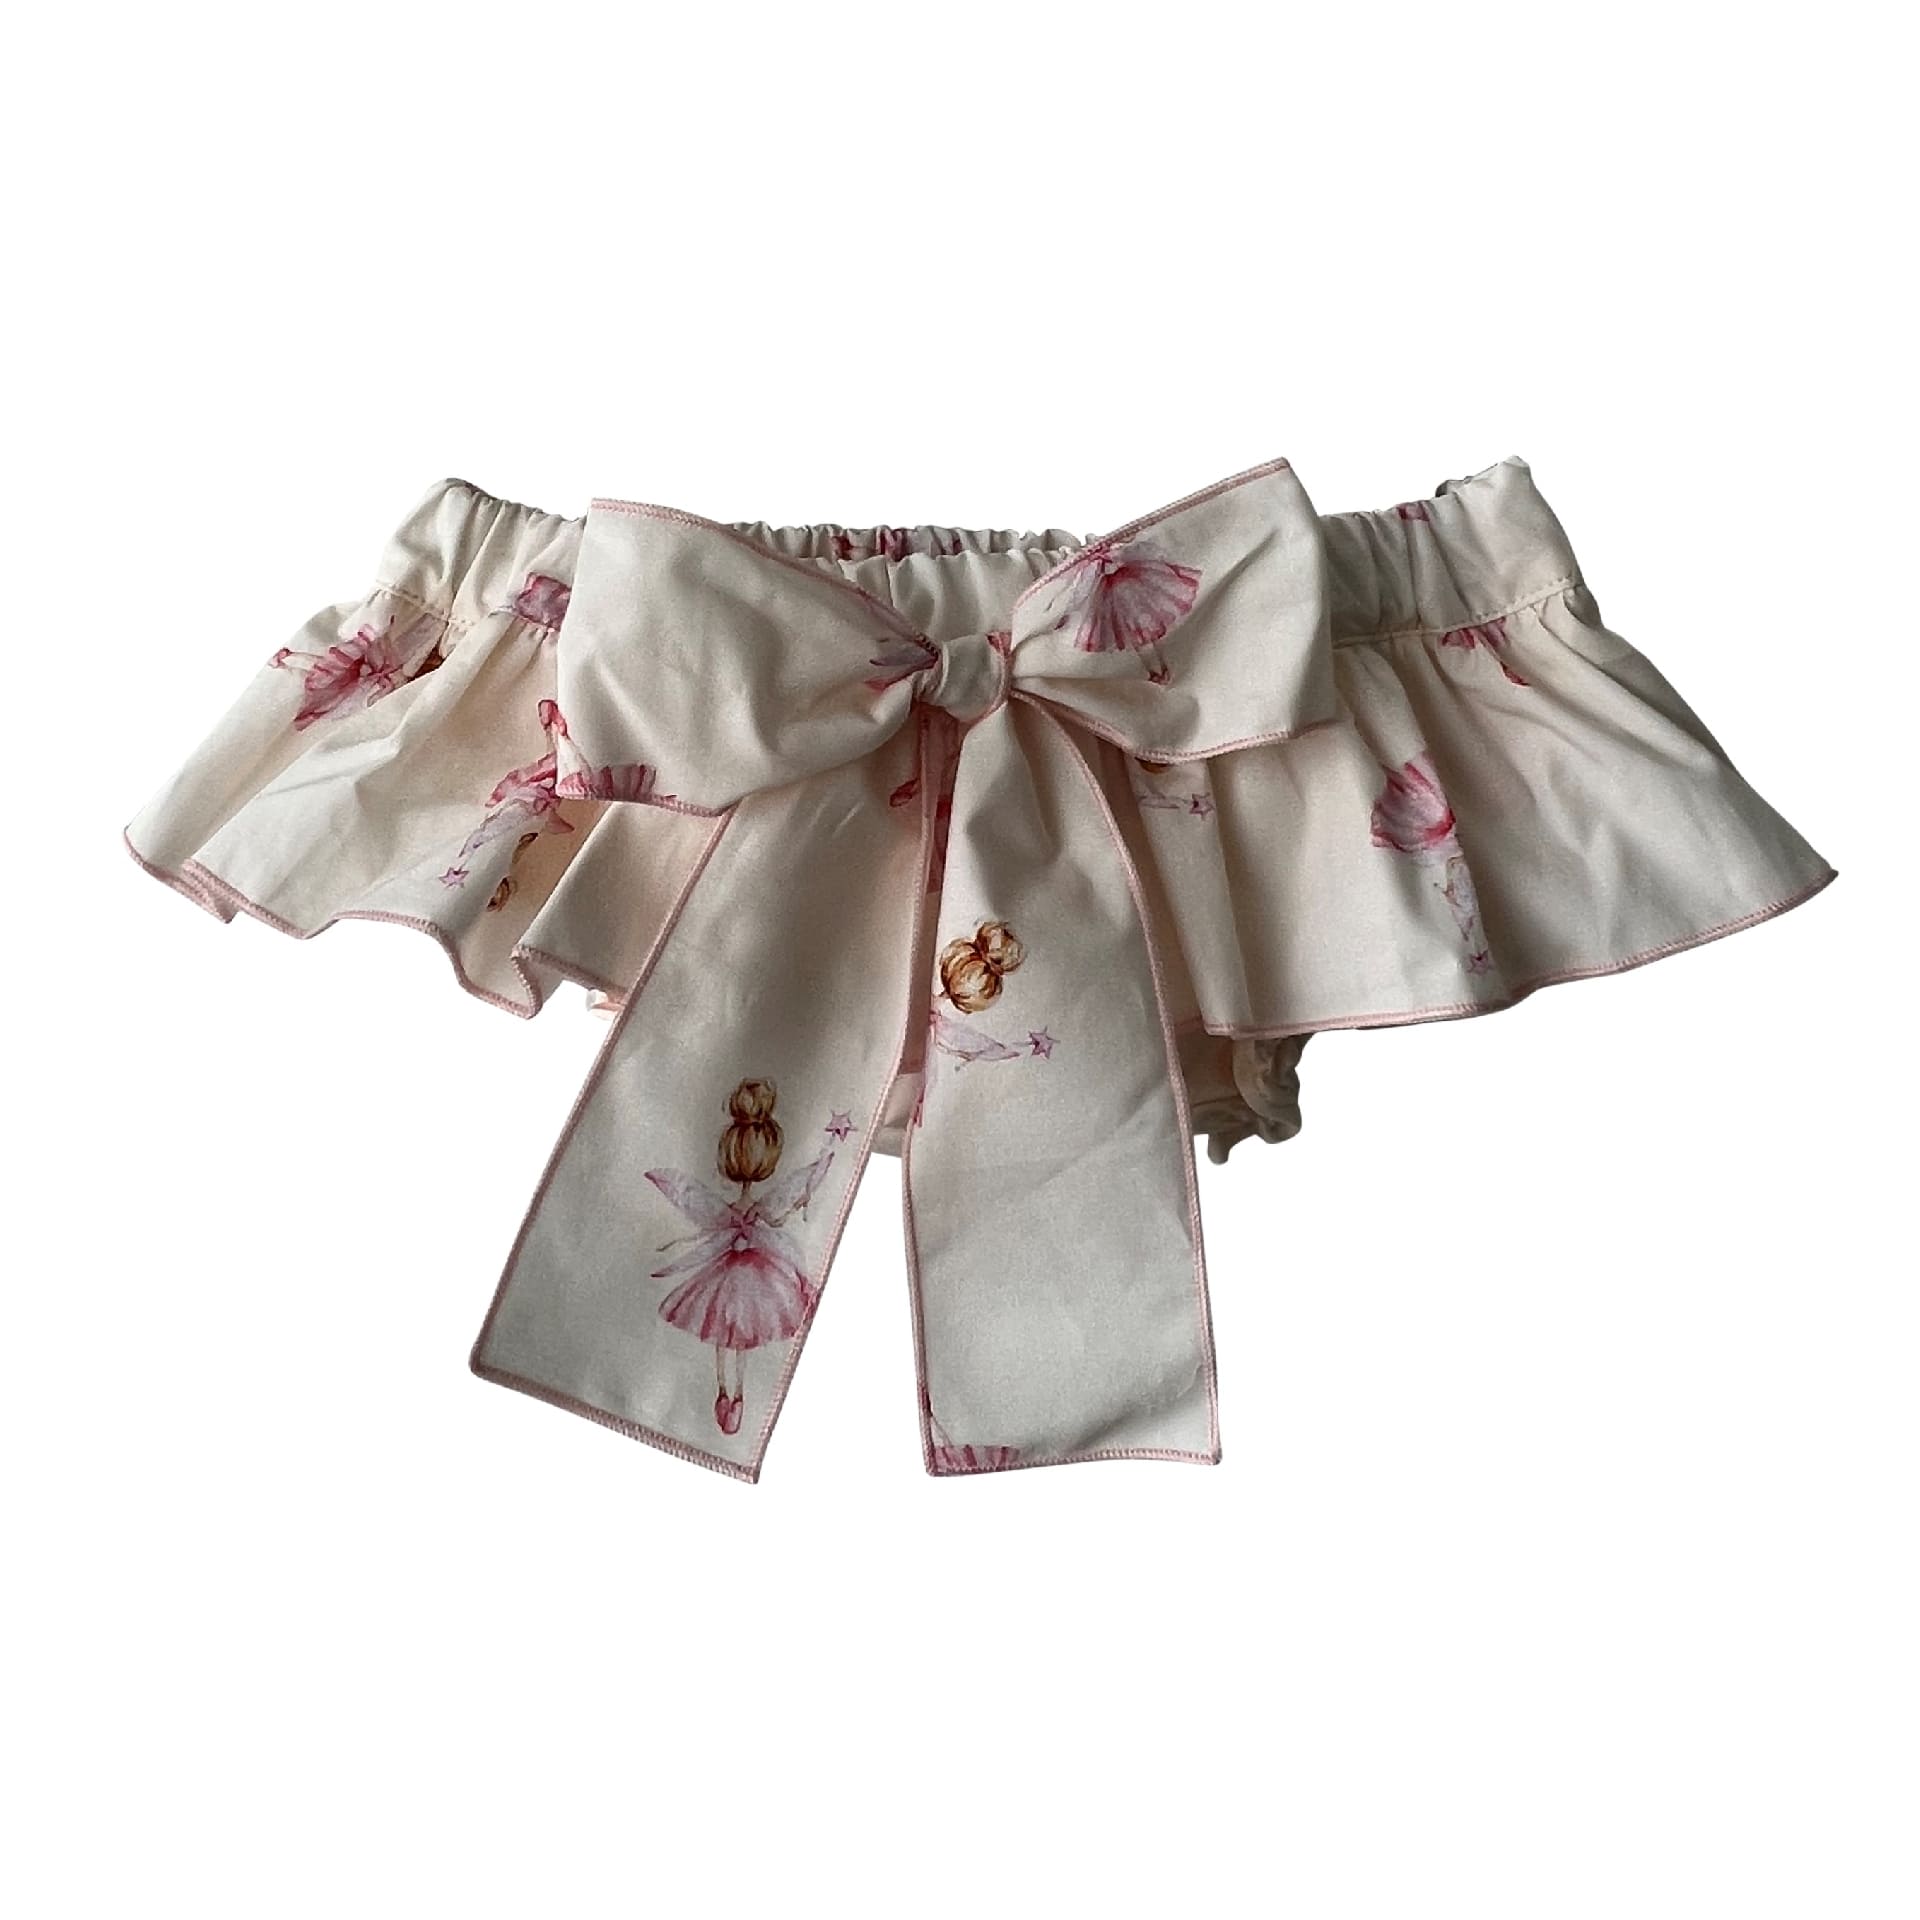 Ivory with ballerinas bloomer